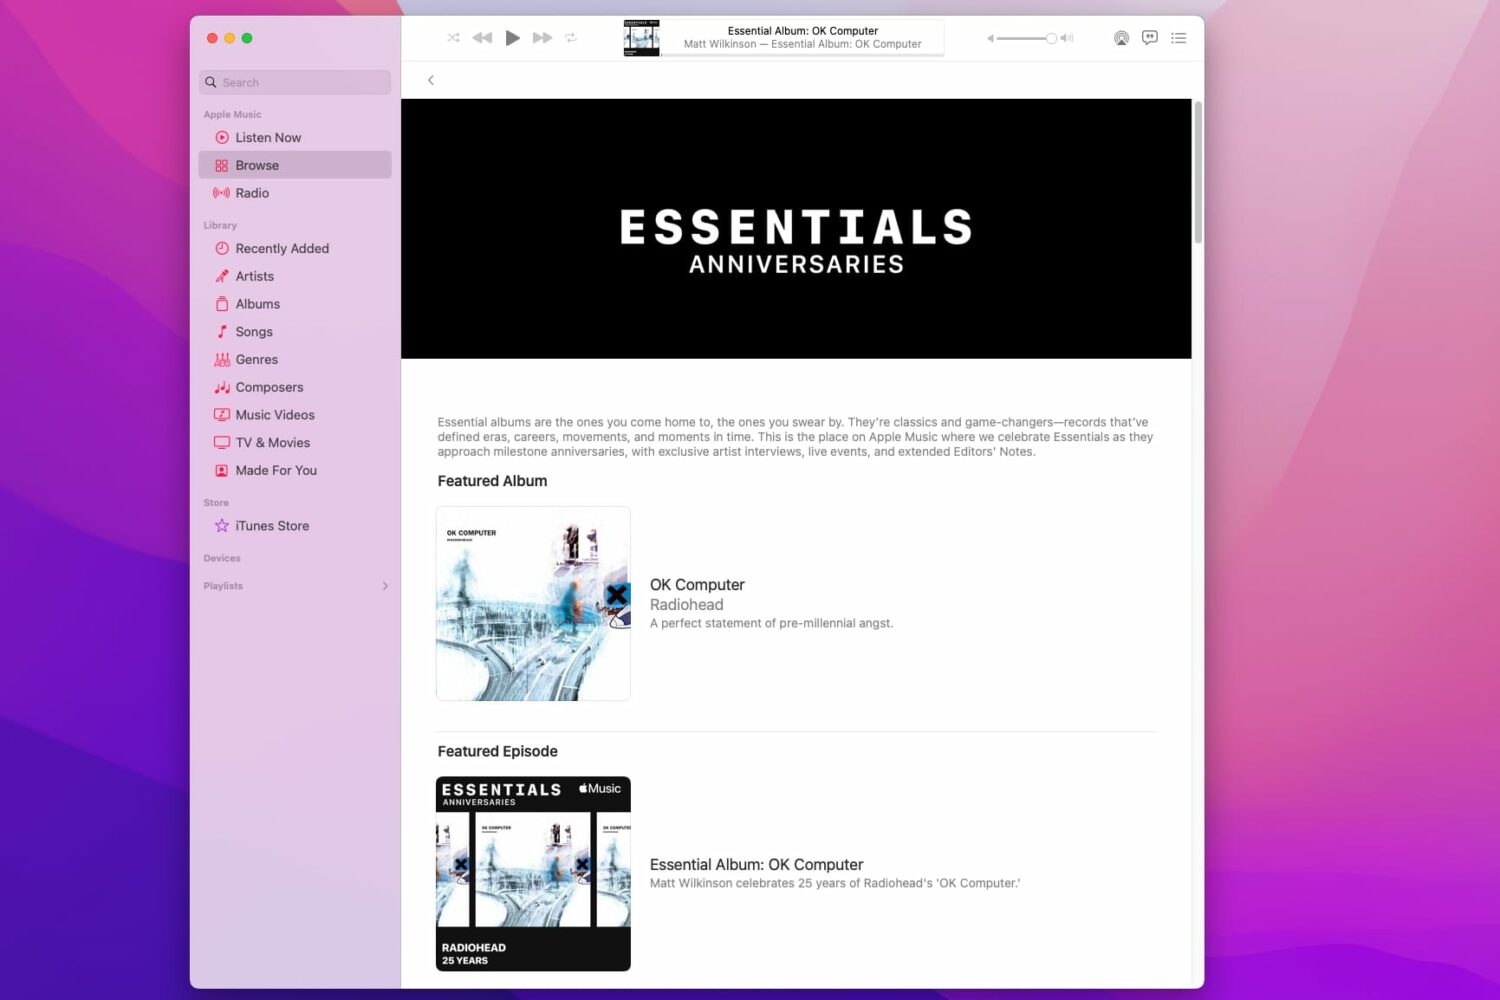 The Essential Anniversaries list that showcases classic albums is shown in this screenshot taken from Apple's Music app on macOS